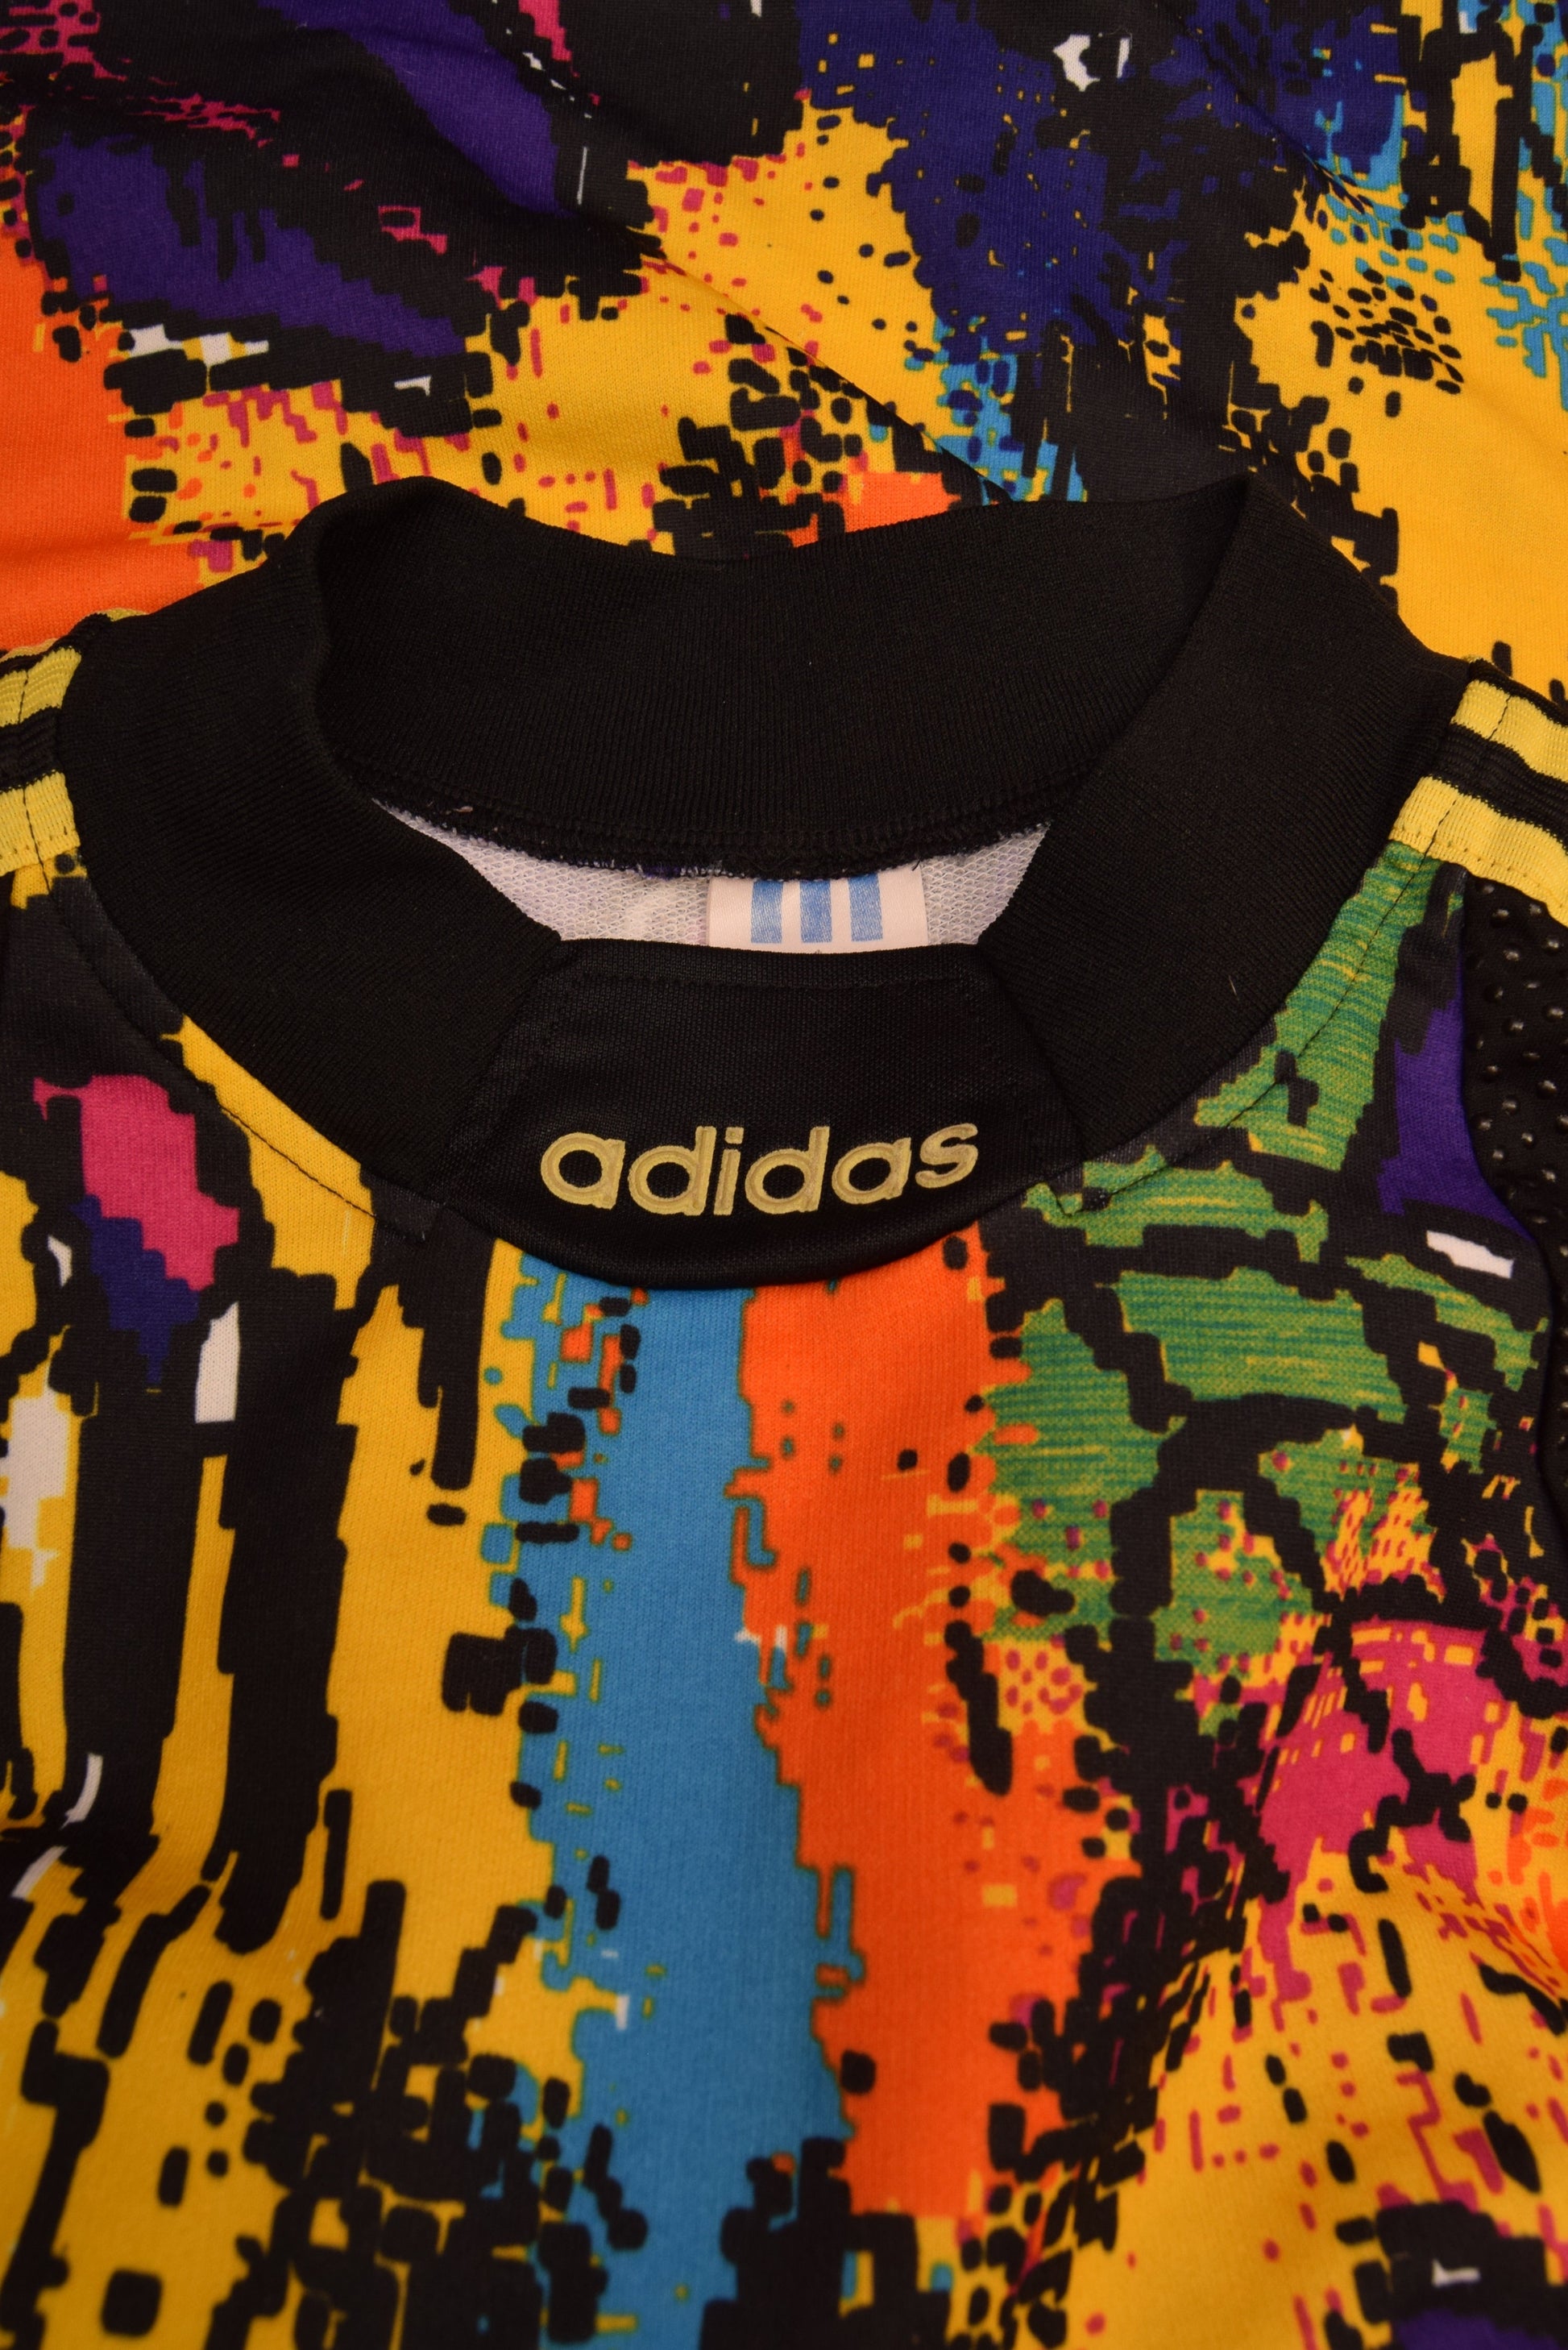 AS Monaco Adidas 1992 - 1993 Goalkeeper Football Shirt Template Size M Abstract Colorful Pattern